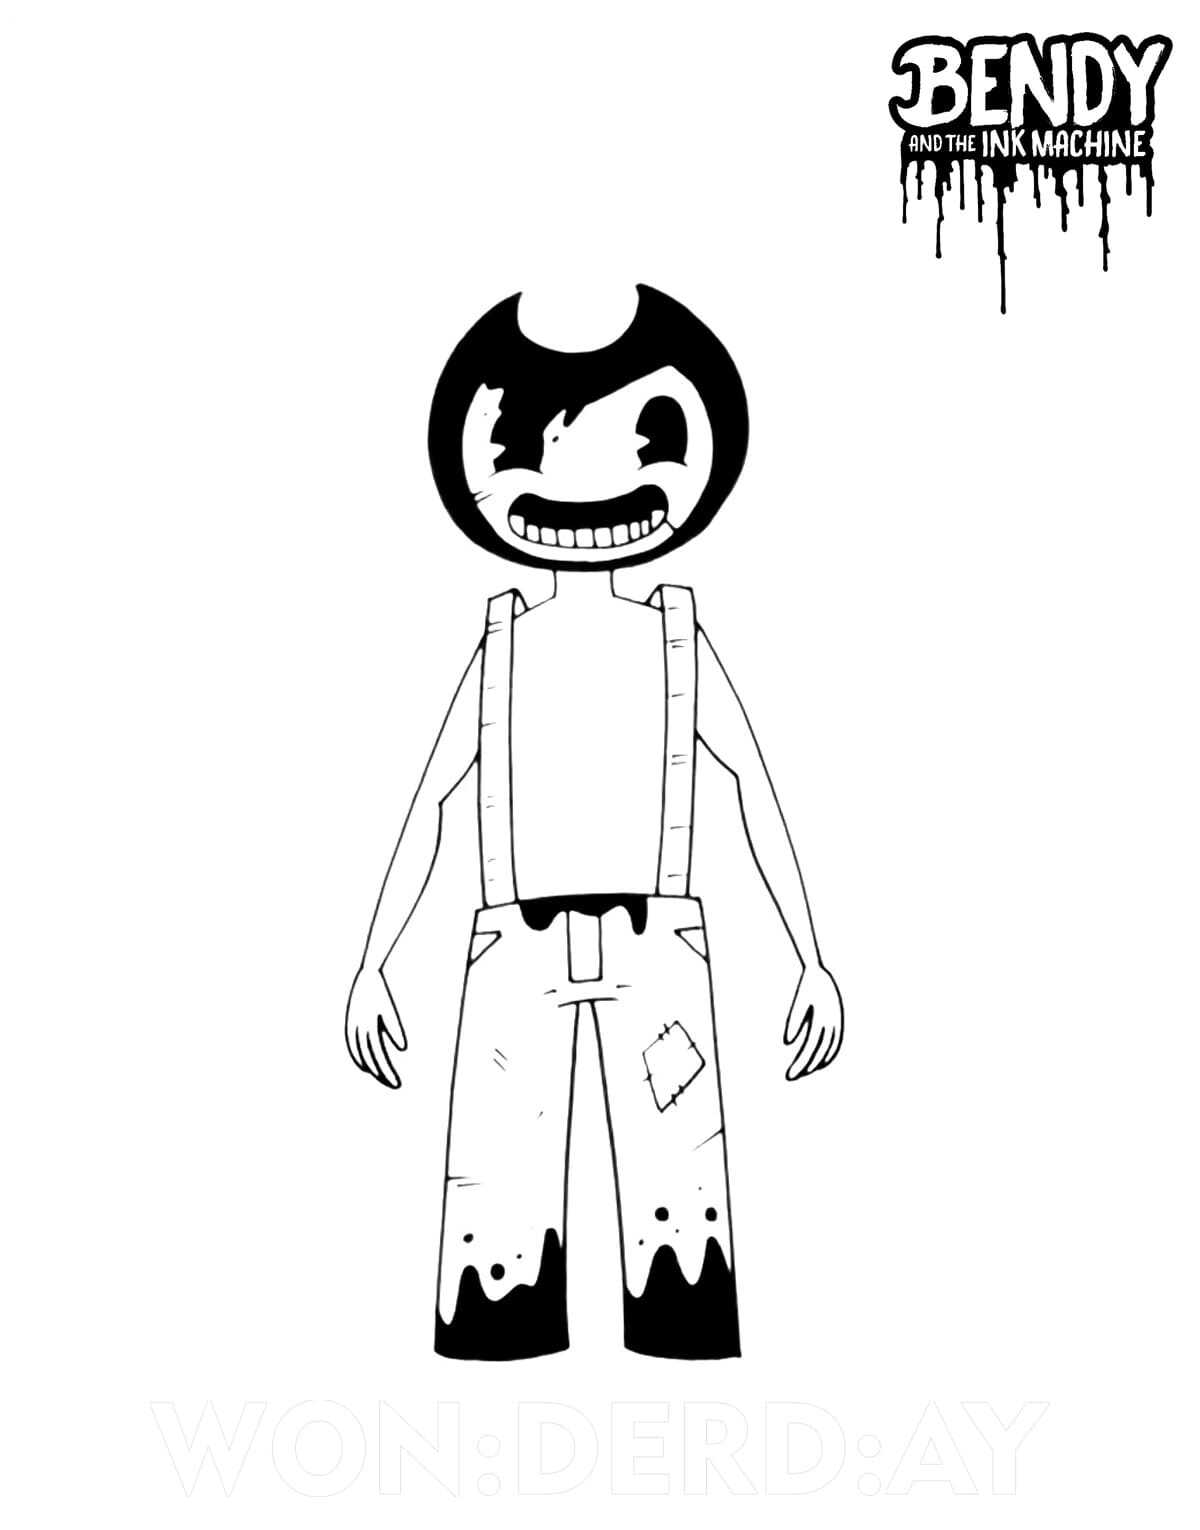 Bendy Coloring Pages sammy lorence